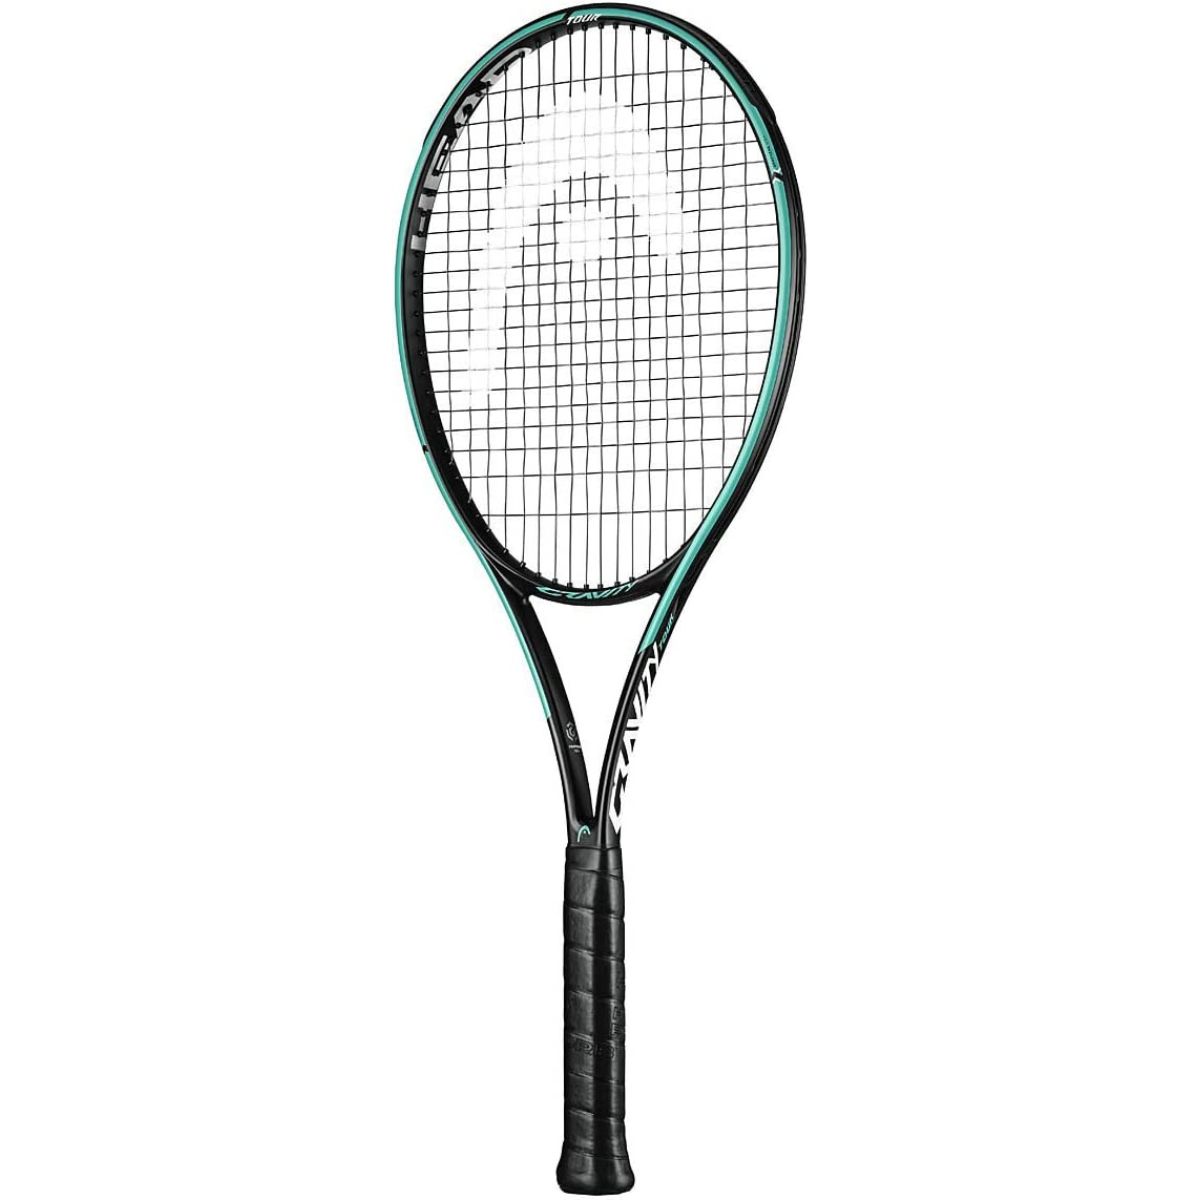 The Best Tennis Rackets for Tennis Elbow Options: Head Gravity Tour Graphene 360+